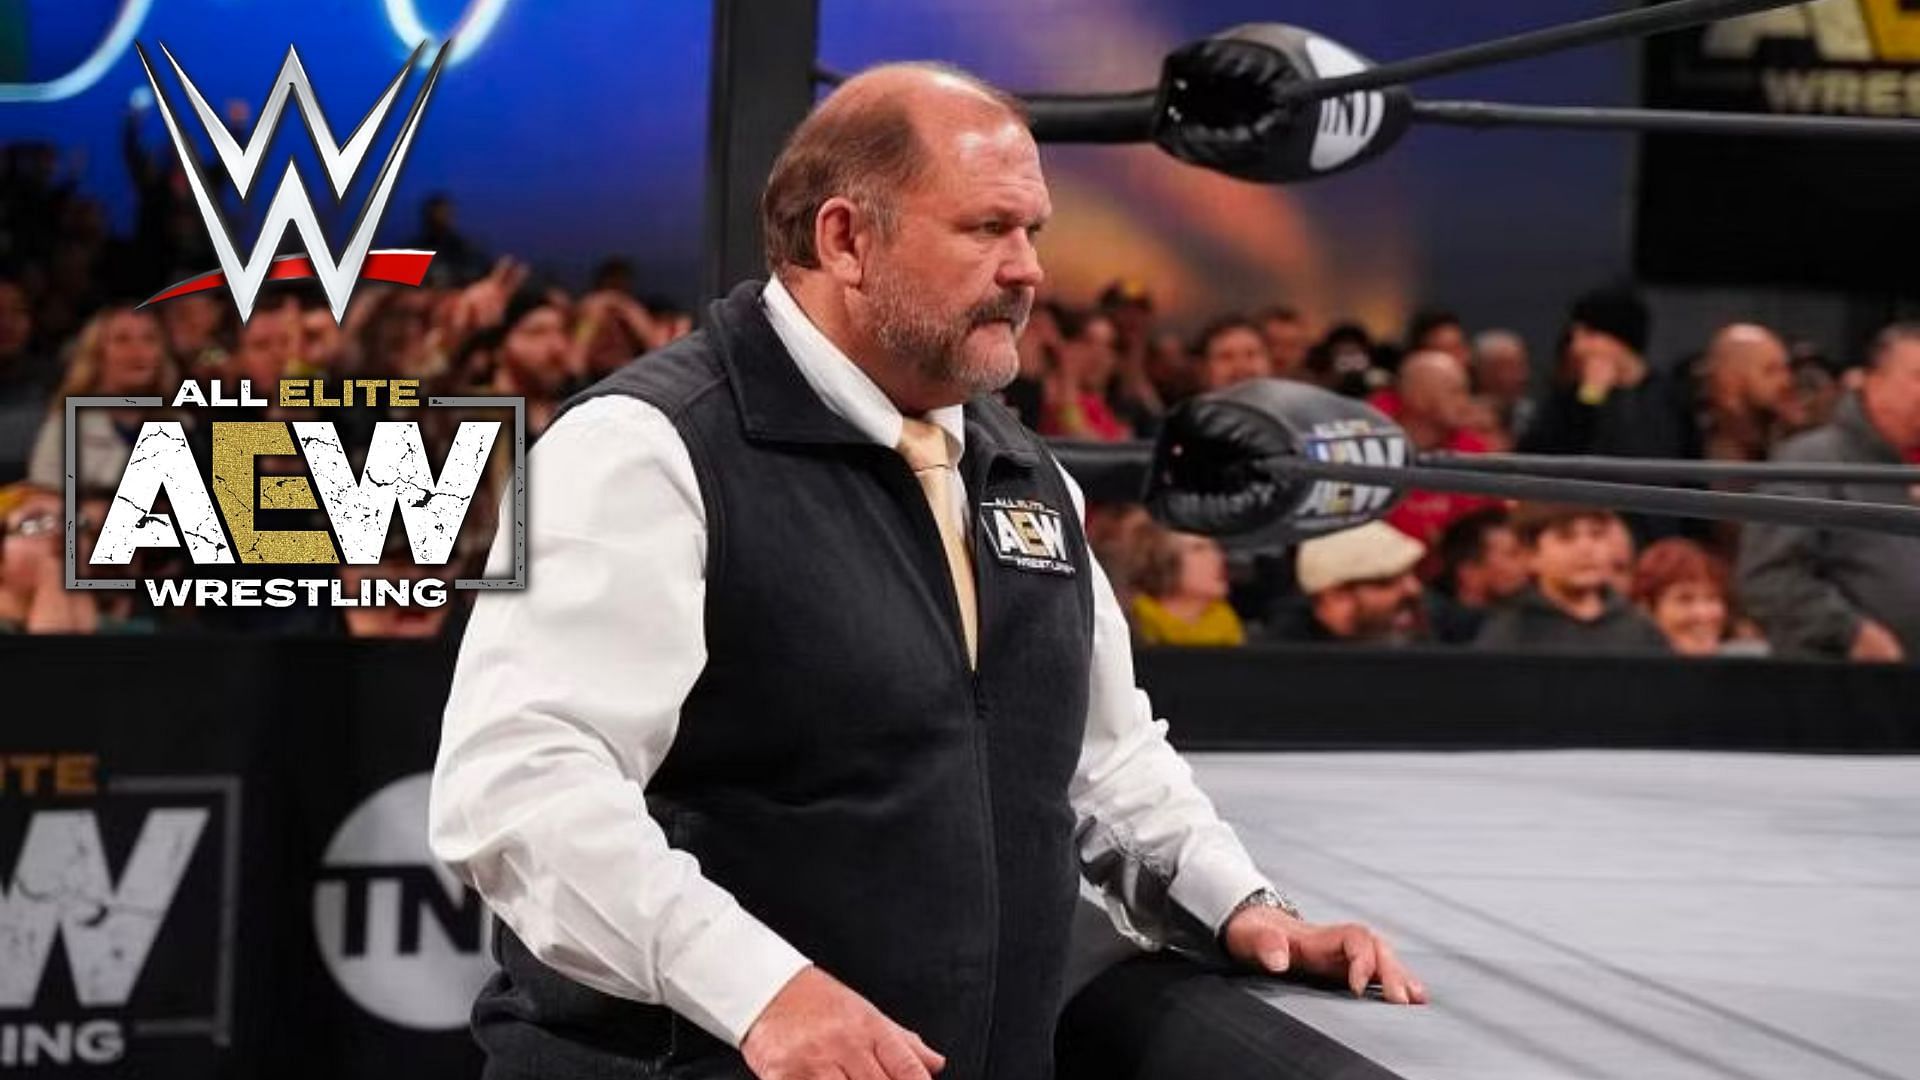 Arn Anderson made an important statement recently